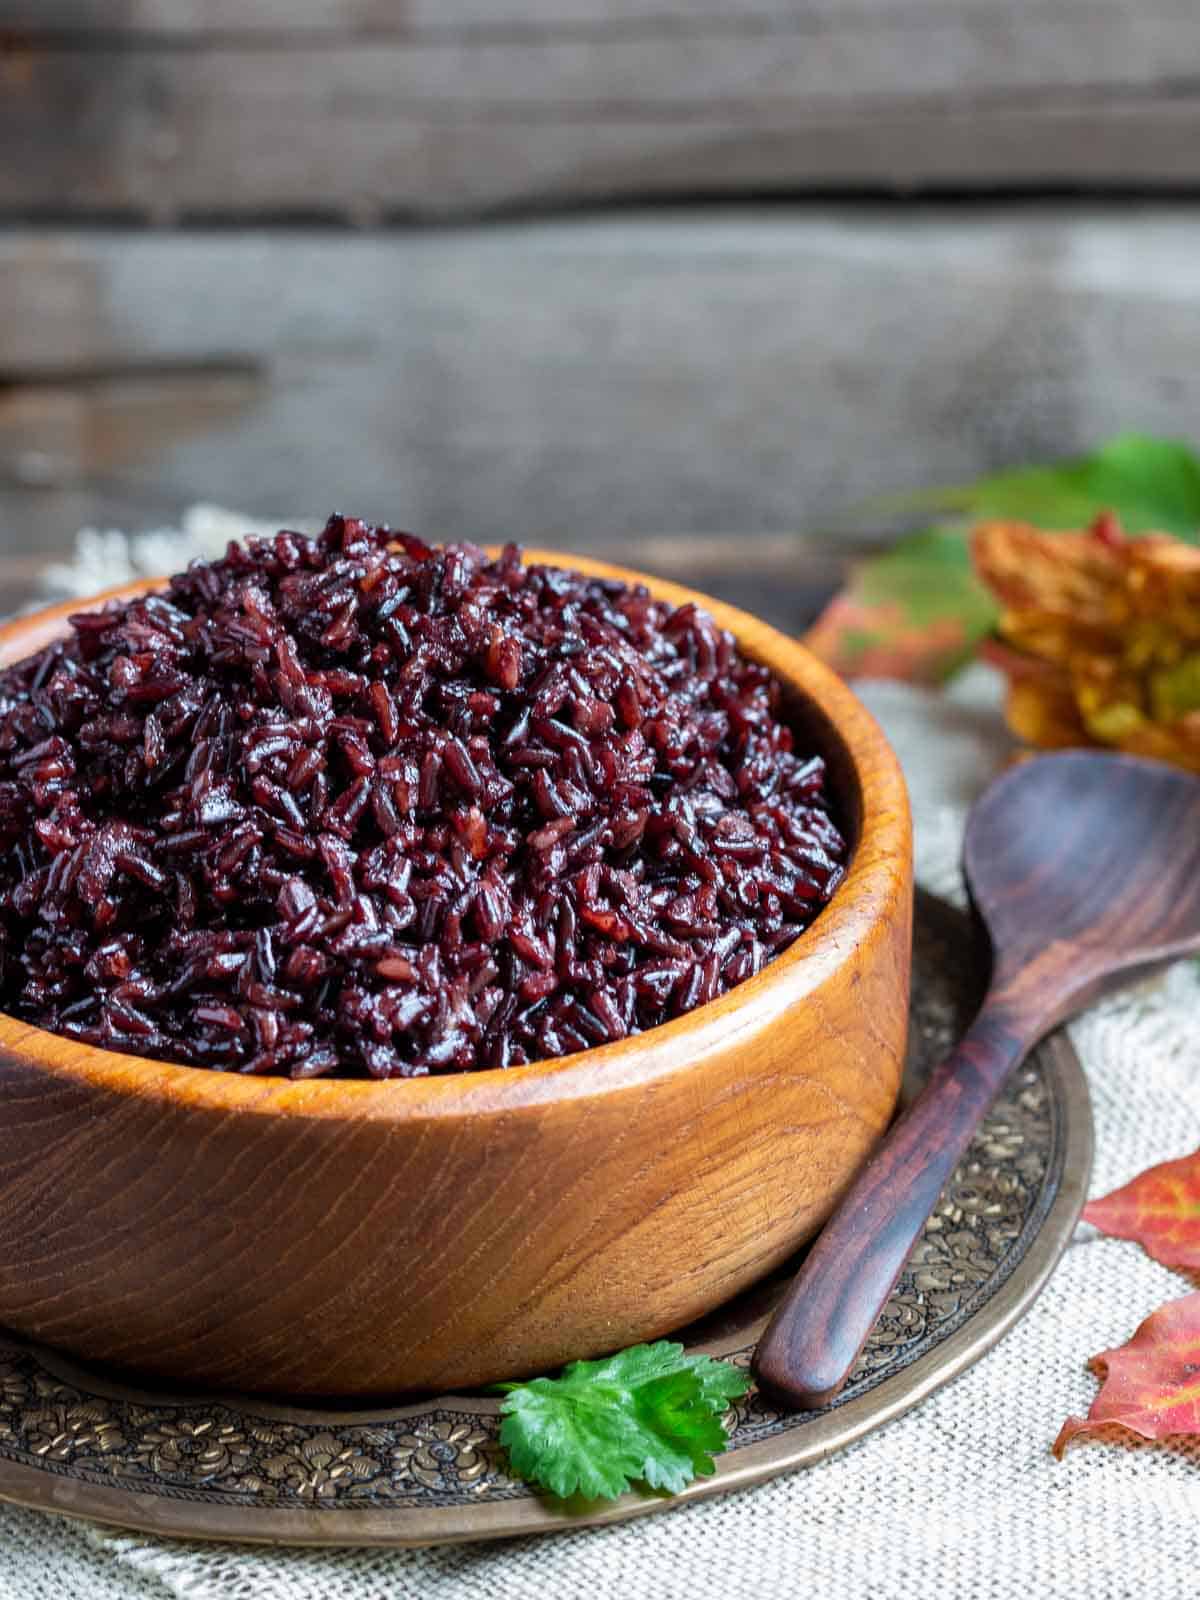 Cooked Instant Pot black rice pilaf in a wooden bowl with fall leaves around bowl.